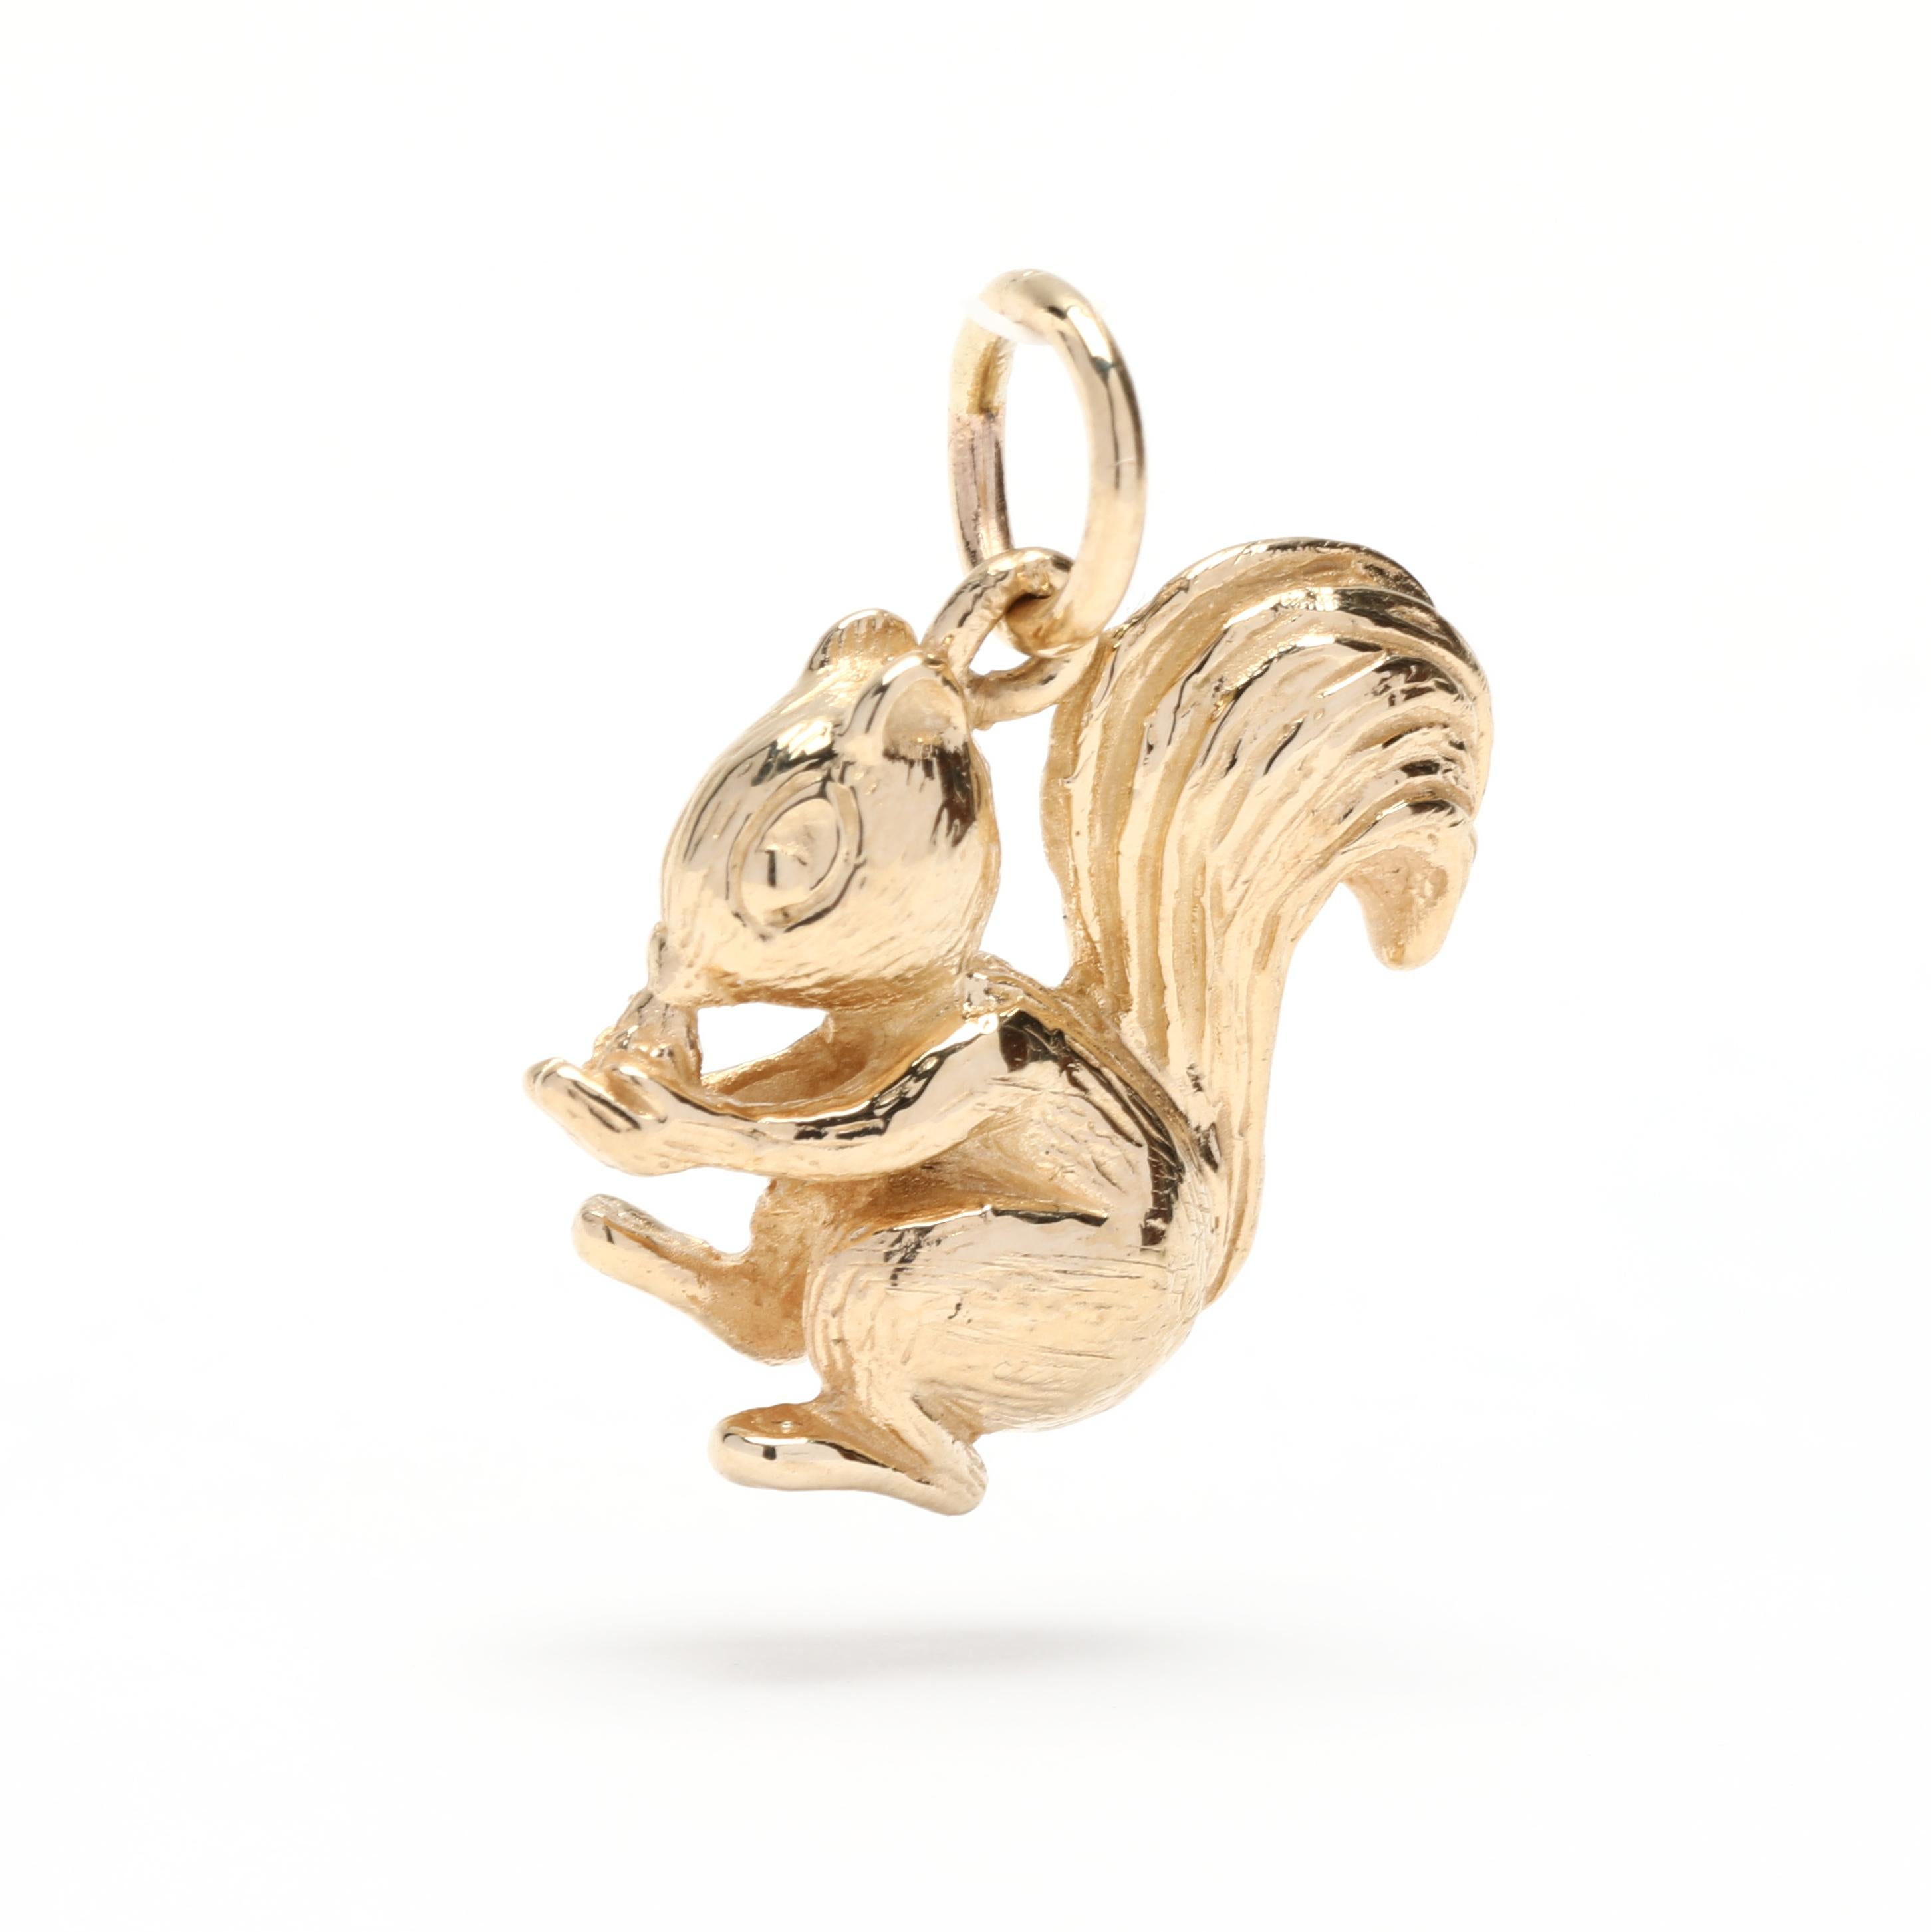 This exquisite 14K Yellow Gold Squirrel Charm is perfect for adding a touch of charm to your jewelry collection! The small gold squirrel charm measures 5/8 of an inch in length and is expertly engraved for an intricate and detailed look. This cute